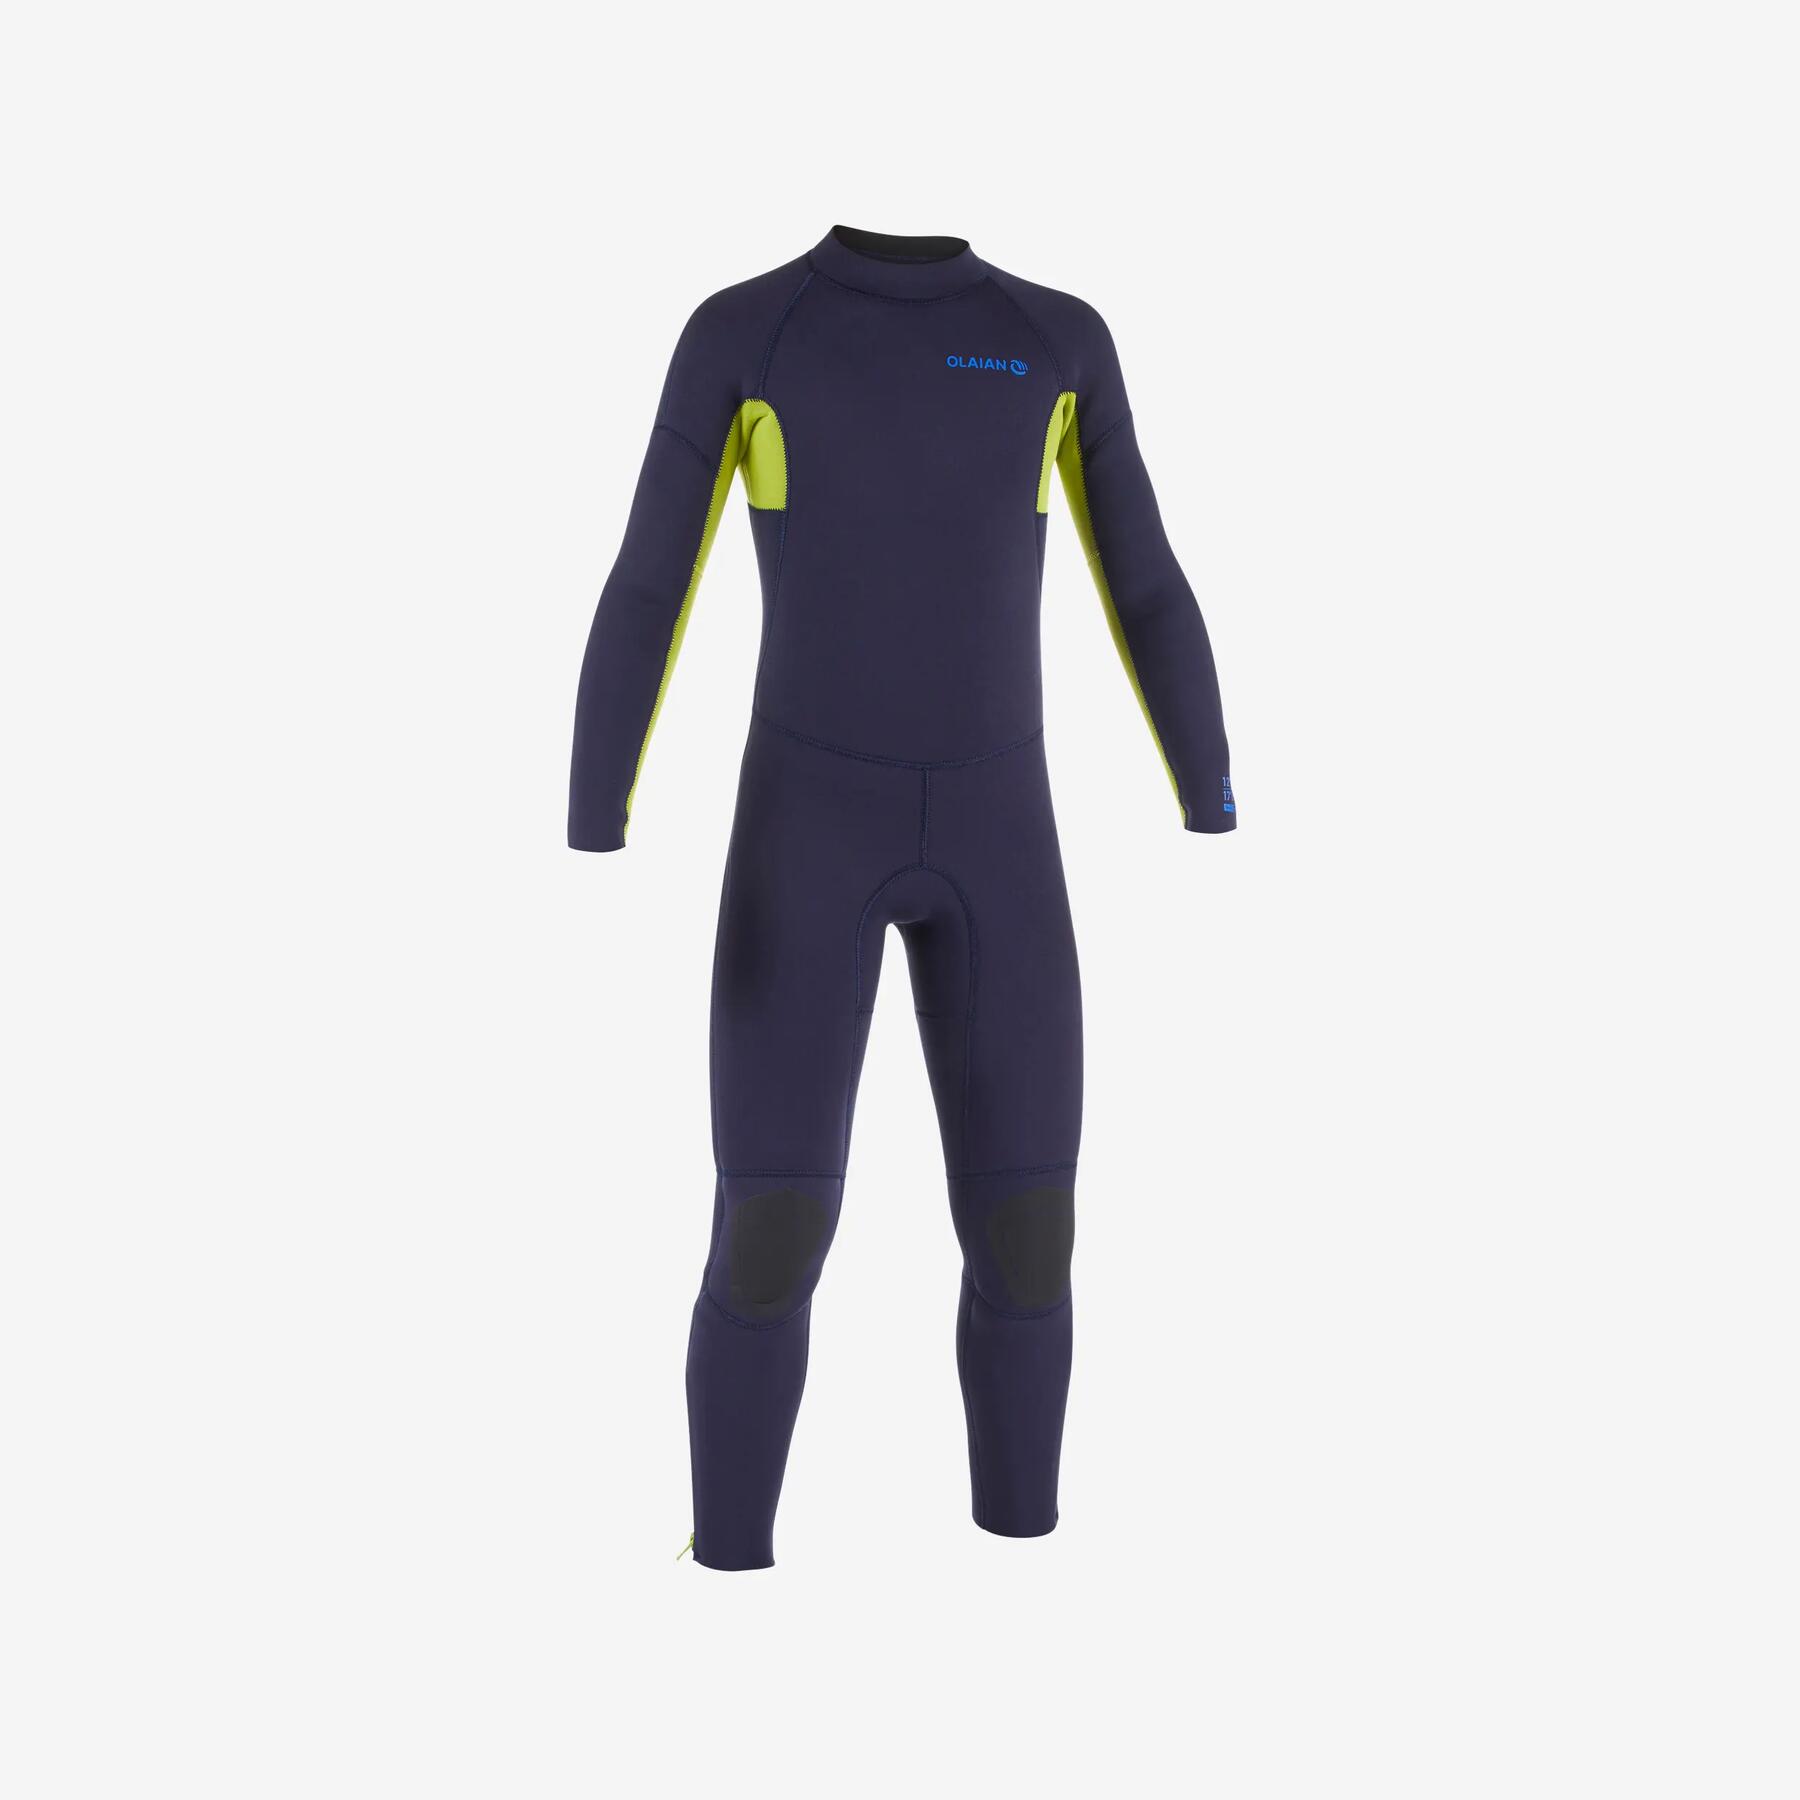 How to Size a Wetsuit for Men, Women & Kids